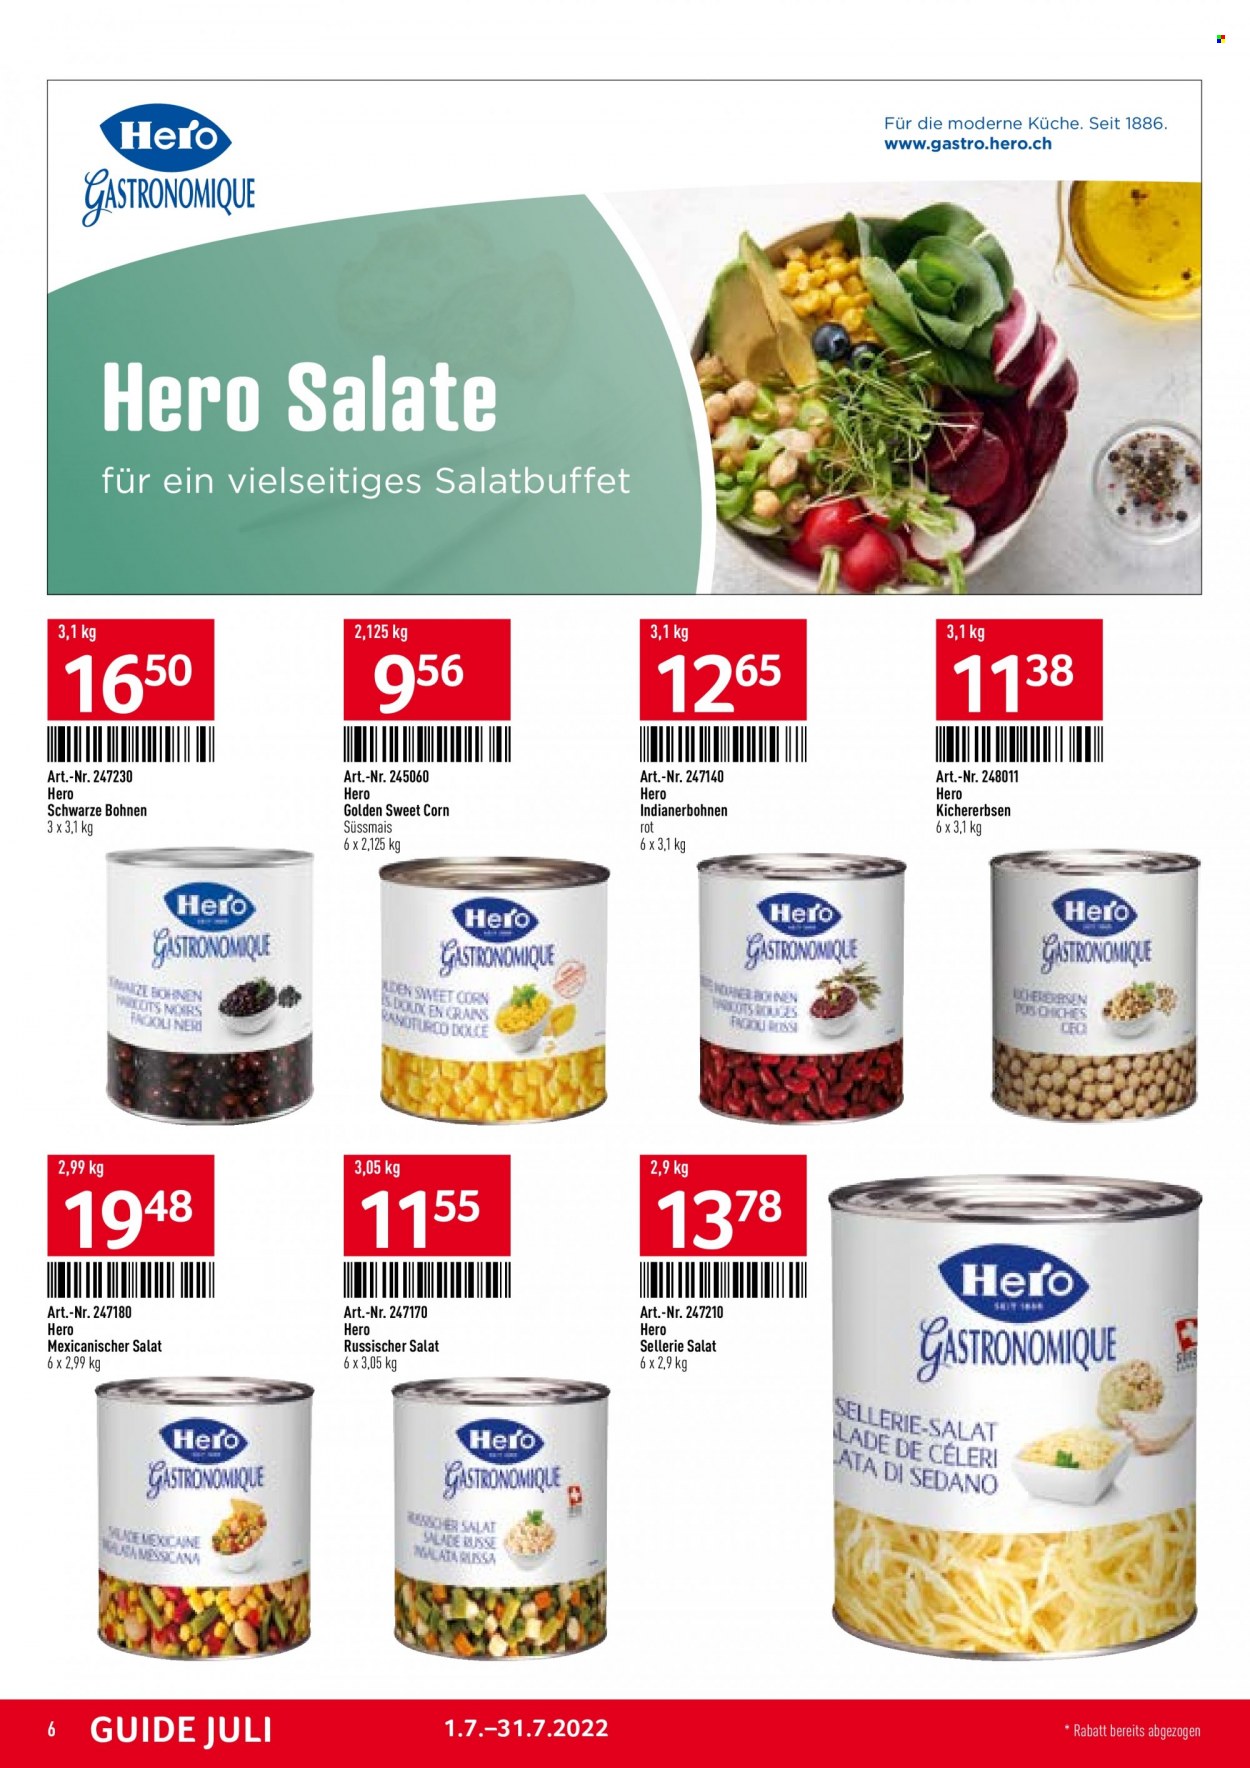 Catalogue TransGourmet - 1.7.2022 - 31.7.2022. Page 6.